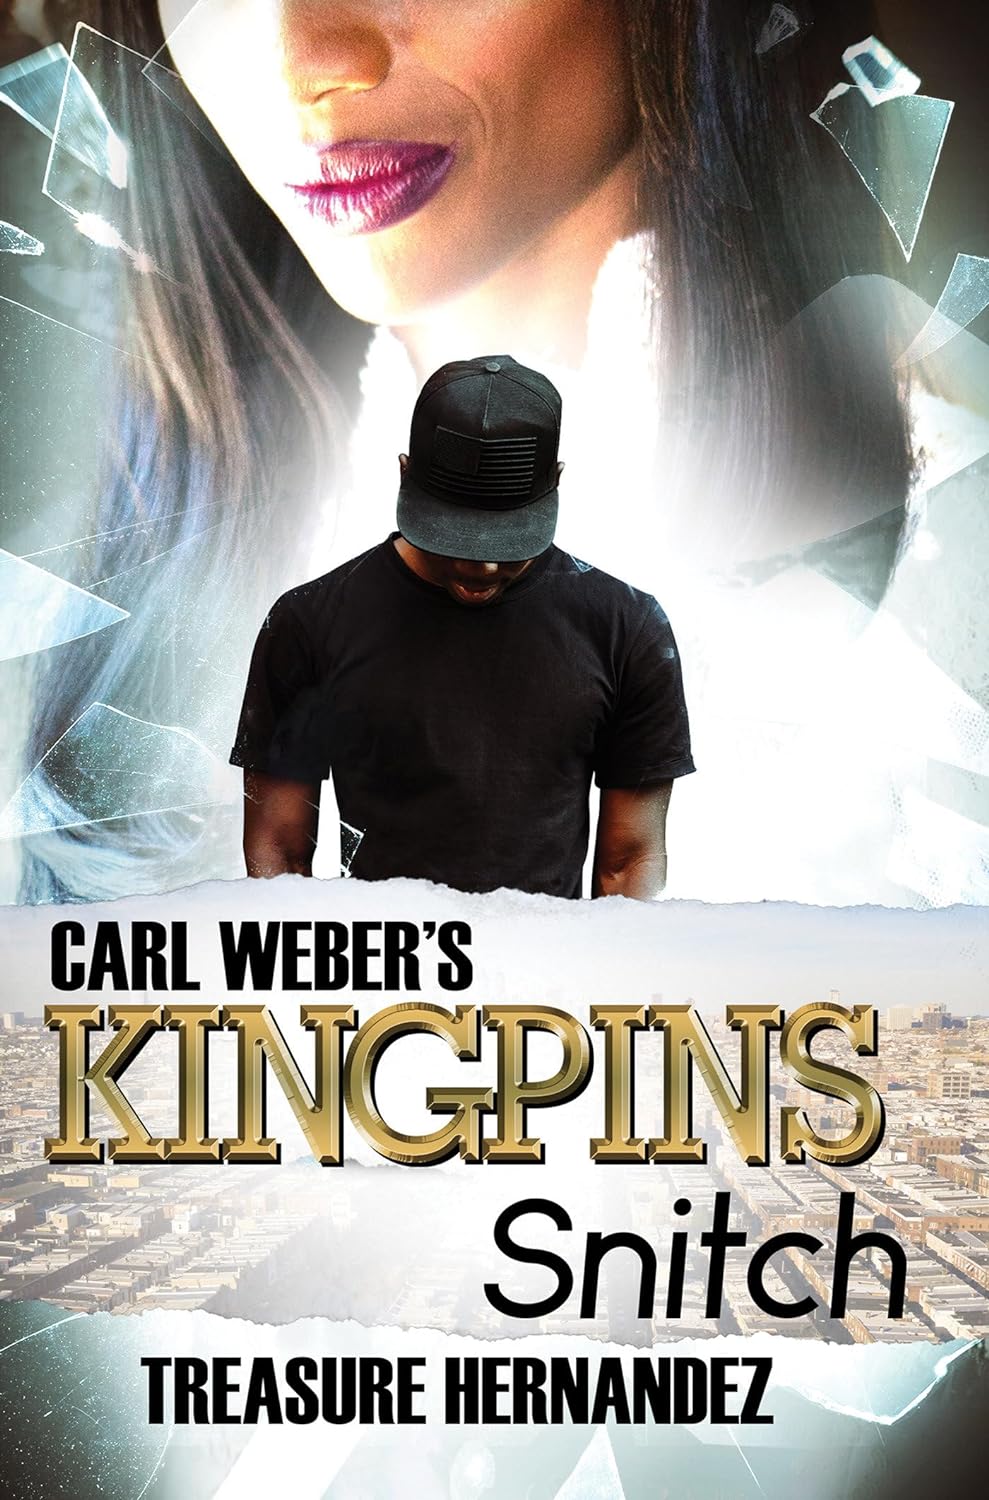 Carl Weber's Kingpins: Snitch - CA Corrections Book Store